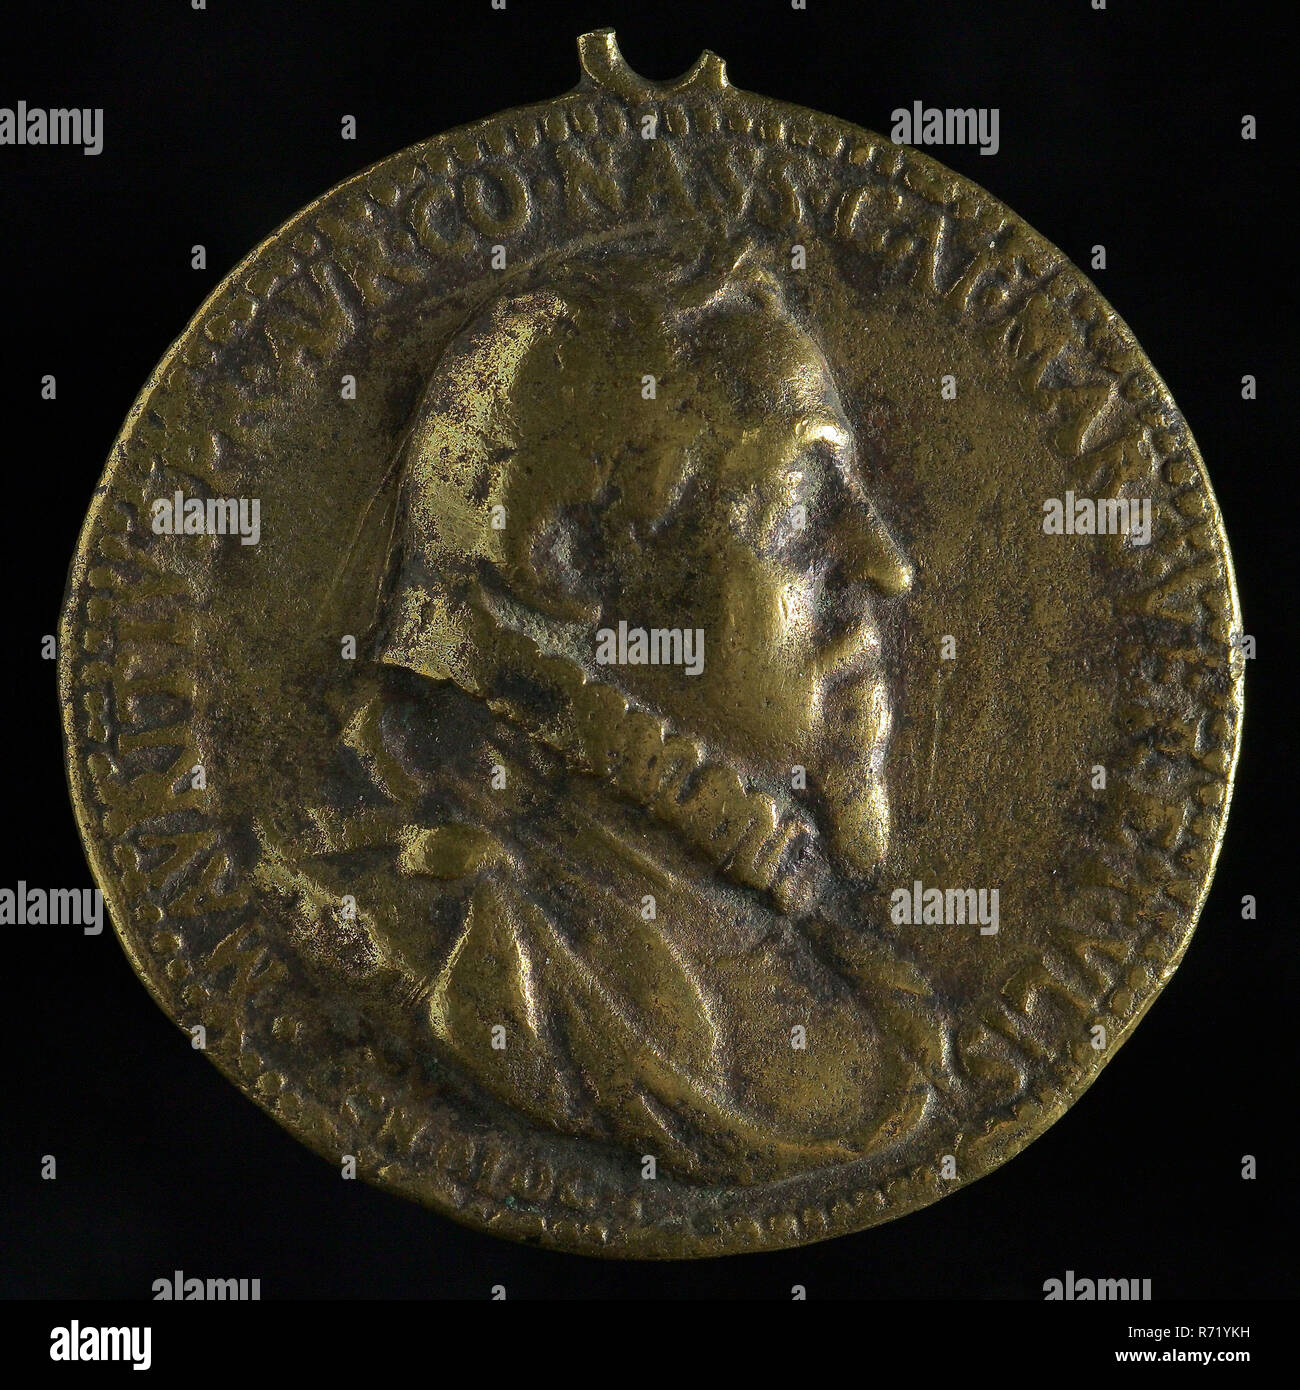 Conraad Bloc, Medal in honor and in grateful recognition of Prince Maurits after the capture of Grave, medallions copper, cast engraved, bust of Prince Maurits to the right. Caption legend: MAVRITIUS PR AVR CO NASS CAT MARC VER. ET VLIS (Maurits Prince of Orange Count of Nassau Katzenelnbogen Margrave of Kampveere and Vlissingen) under bust: CON BLOC F Prince Maurits Grave Stock Photo